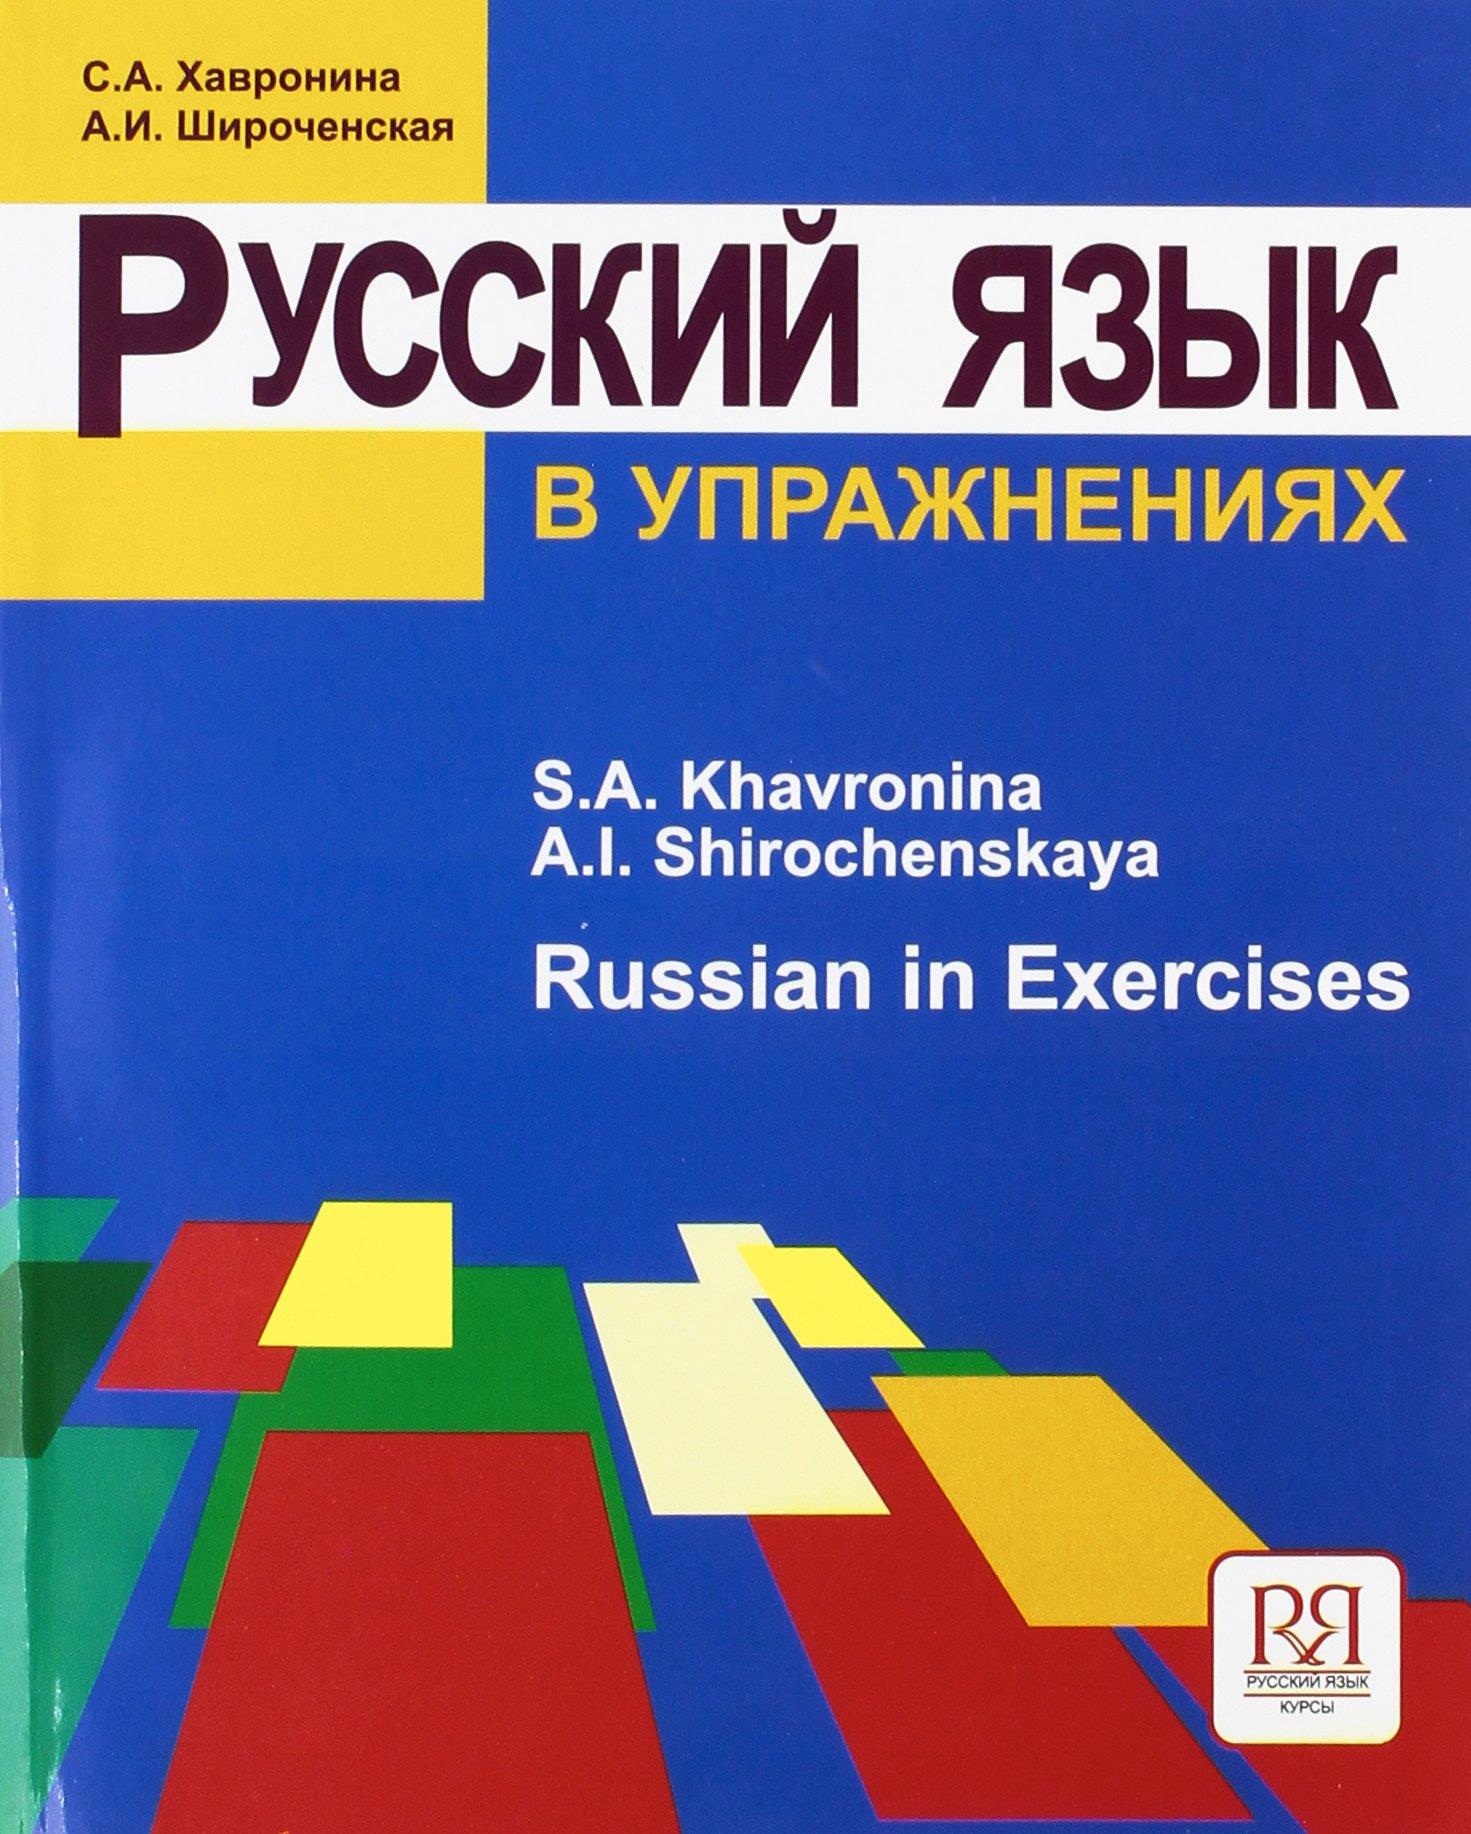 RUSSIAN IN EXERCISES